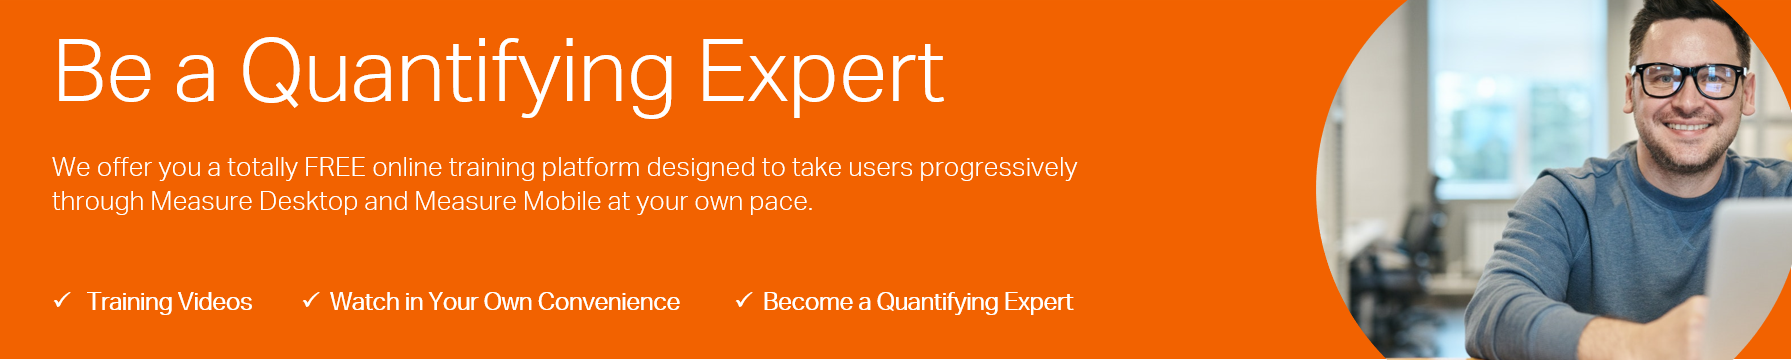 Become a Quantifying Expert Website Banner.png